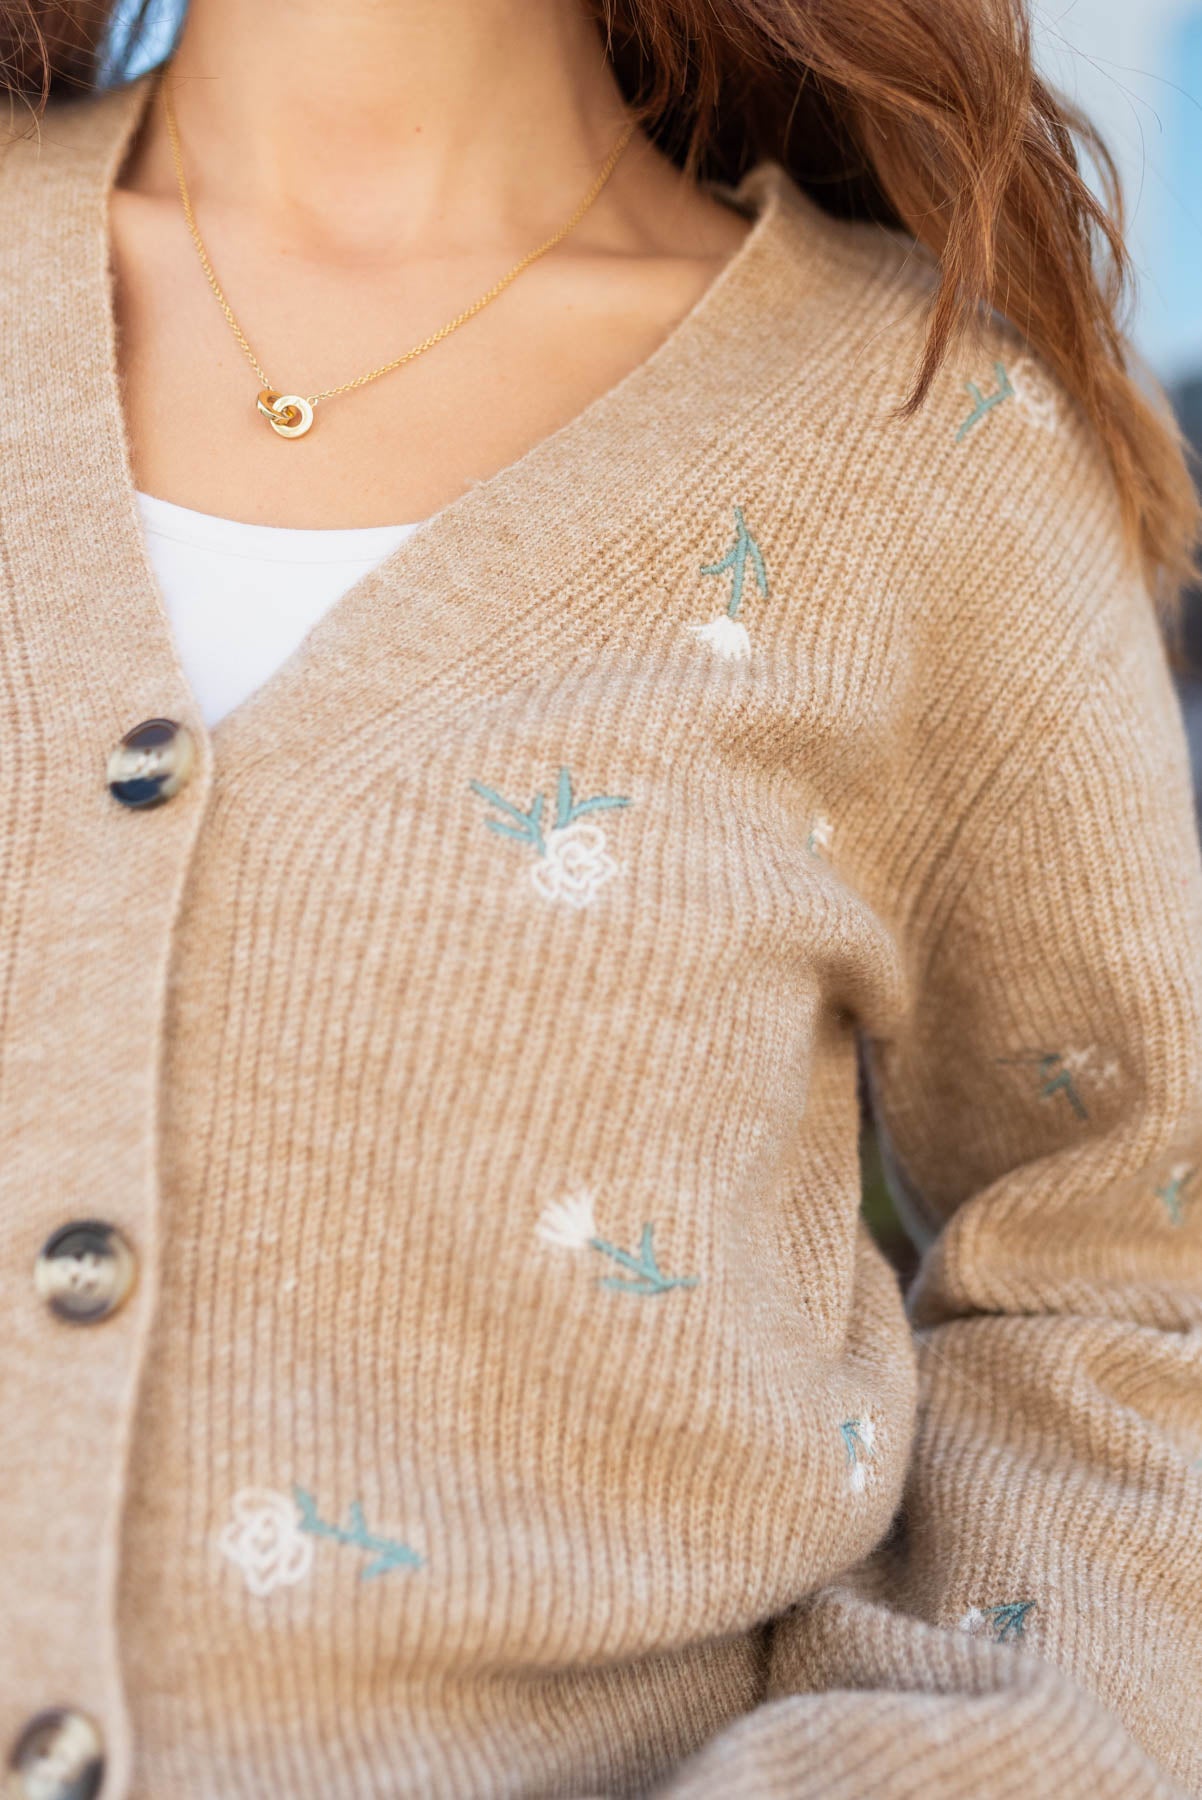 Embroidery flowers on the khaki cardigan